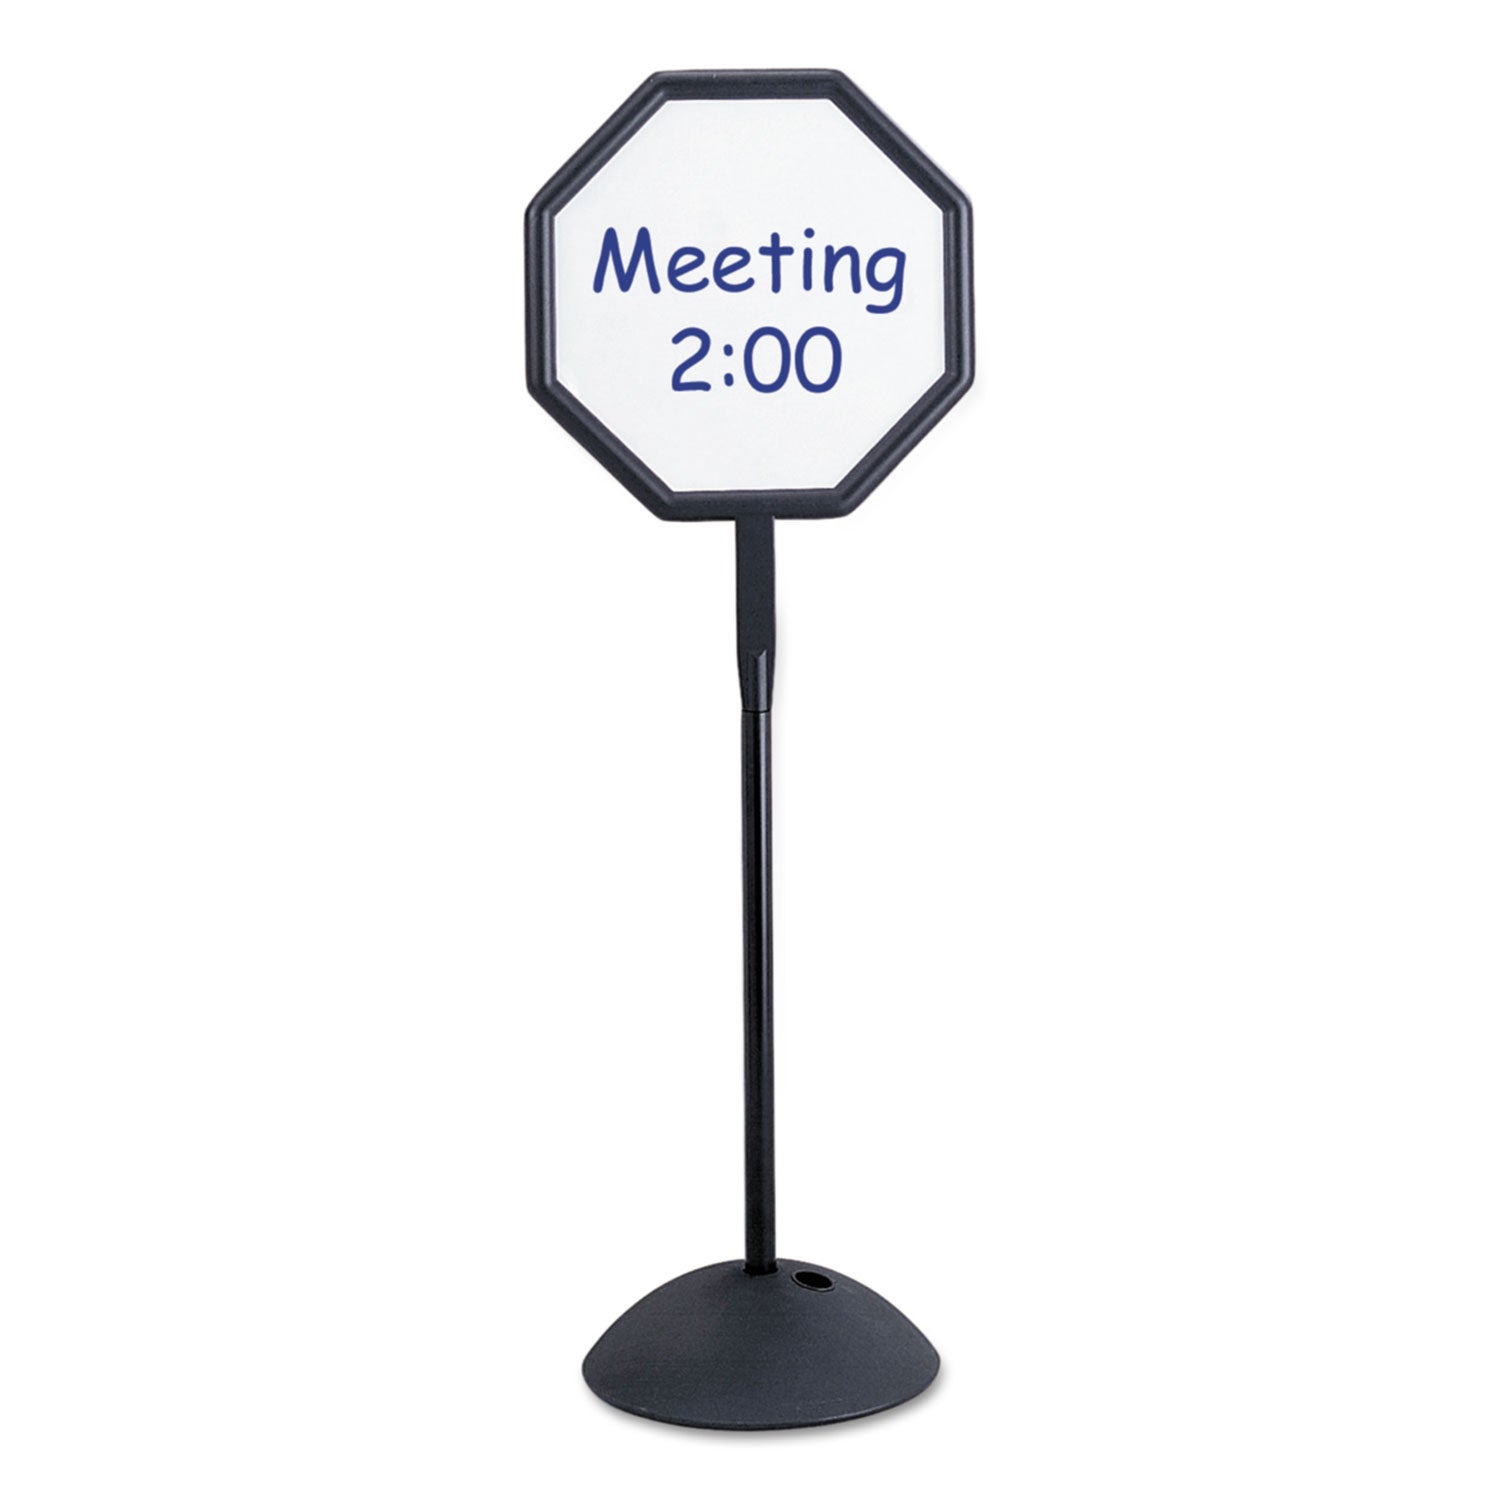 Safco Write Way Dual-sided Directional Sign - 1 Each - 22.5" Width x 65" Height x 18" Depth - Octagonal Shape - Both Sides Display, Magnetic, Durable - Steel - Indoor, Outdoor, Office - Black - 1